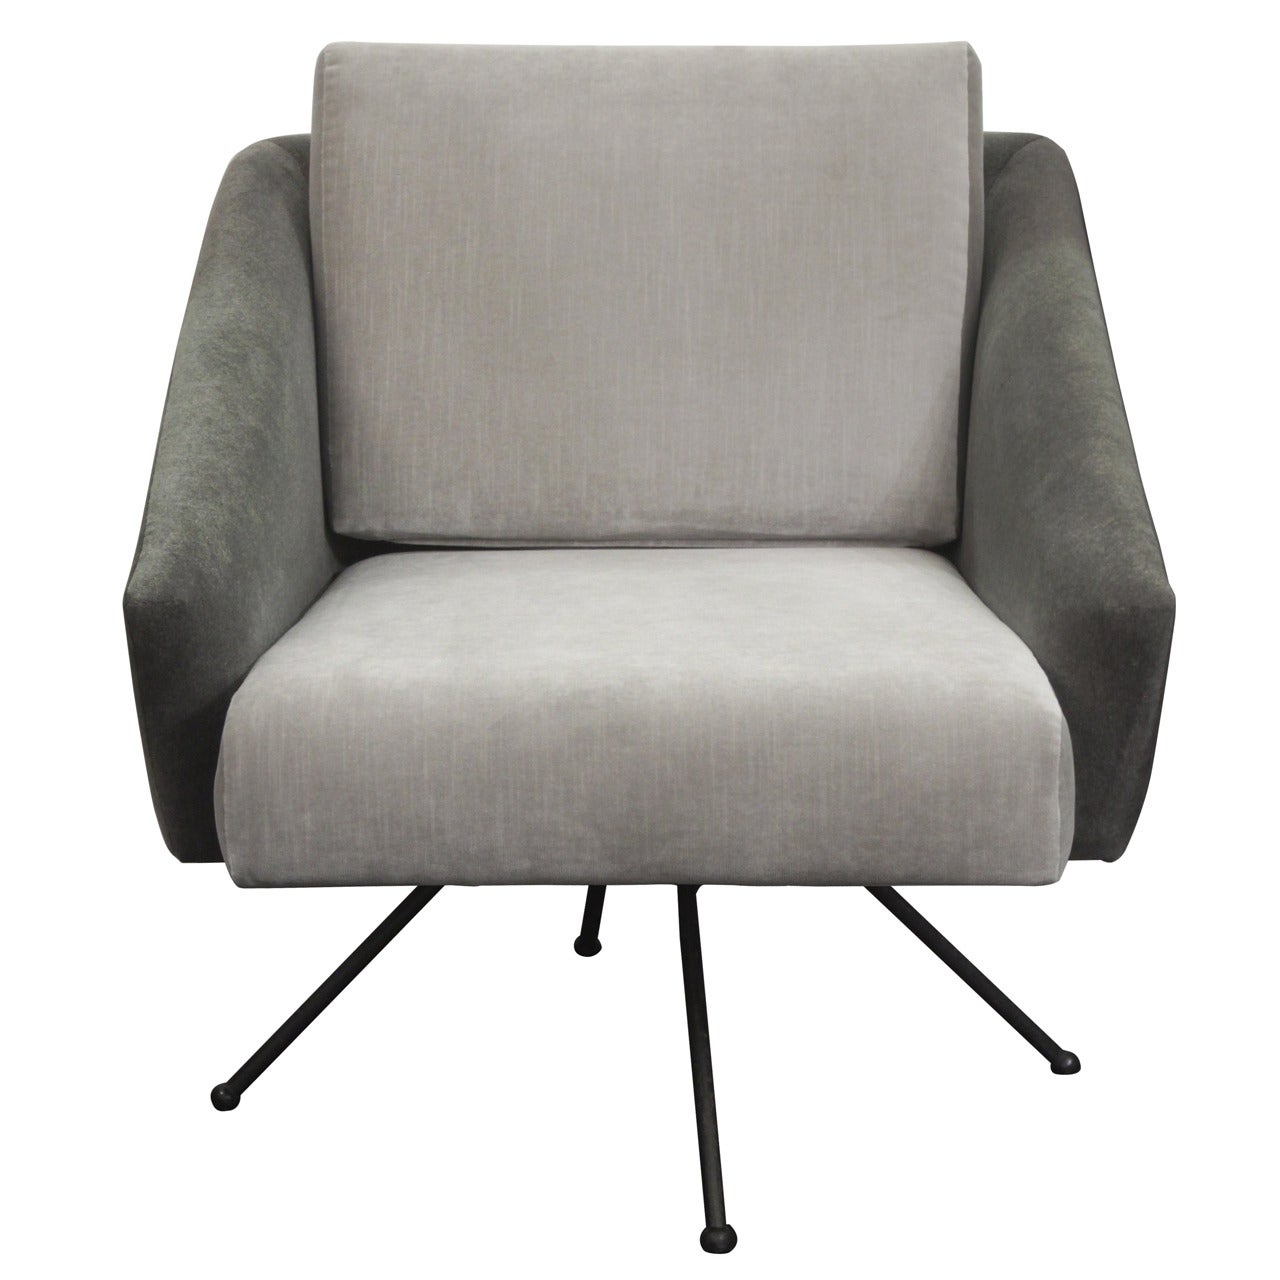 Swiveling Sculptural Lounge Chair with Splayed Legs